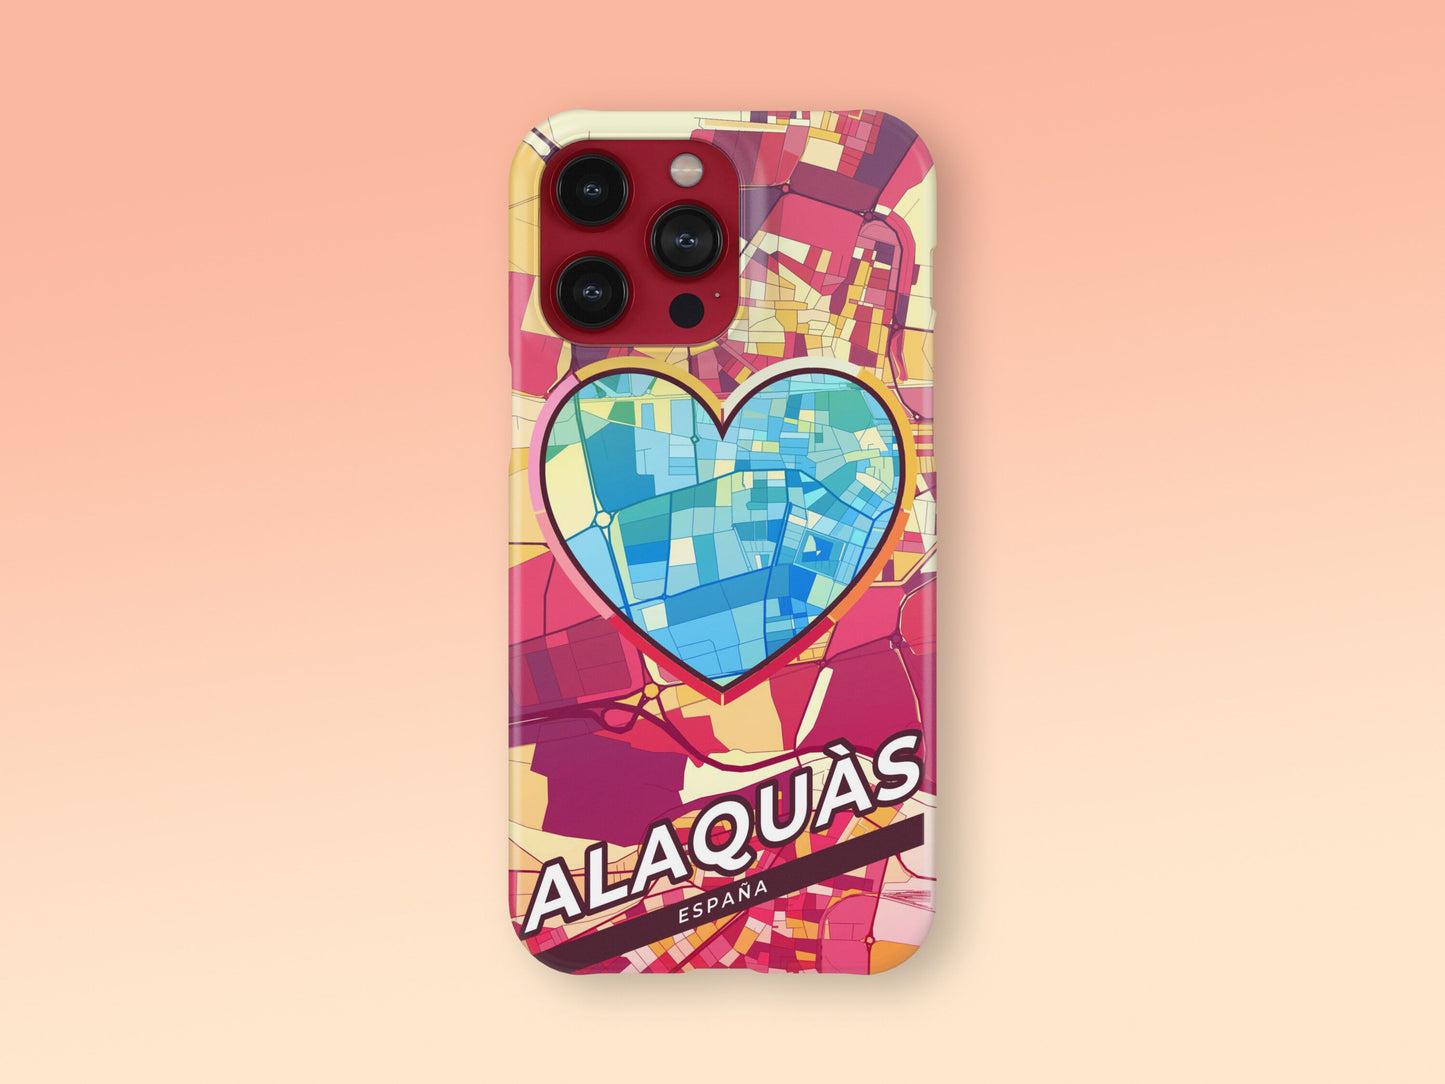 Alaquàs Spain slim phone case with colorful icon. Birthday, wedding or housewarming gift. Couple match cases. 2